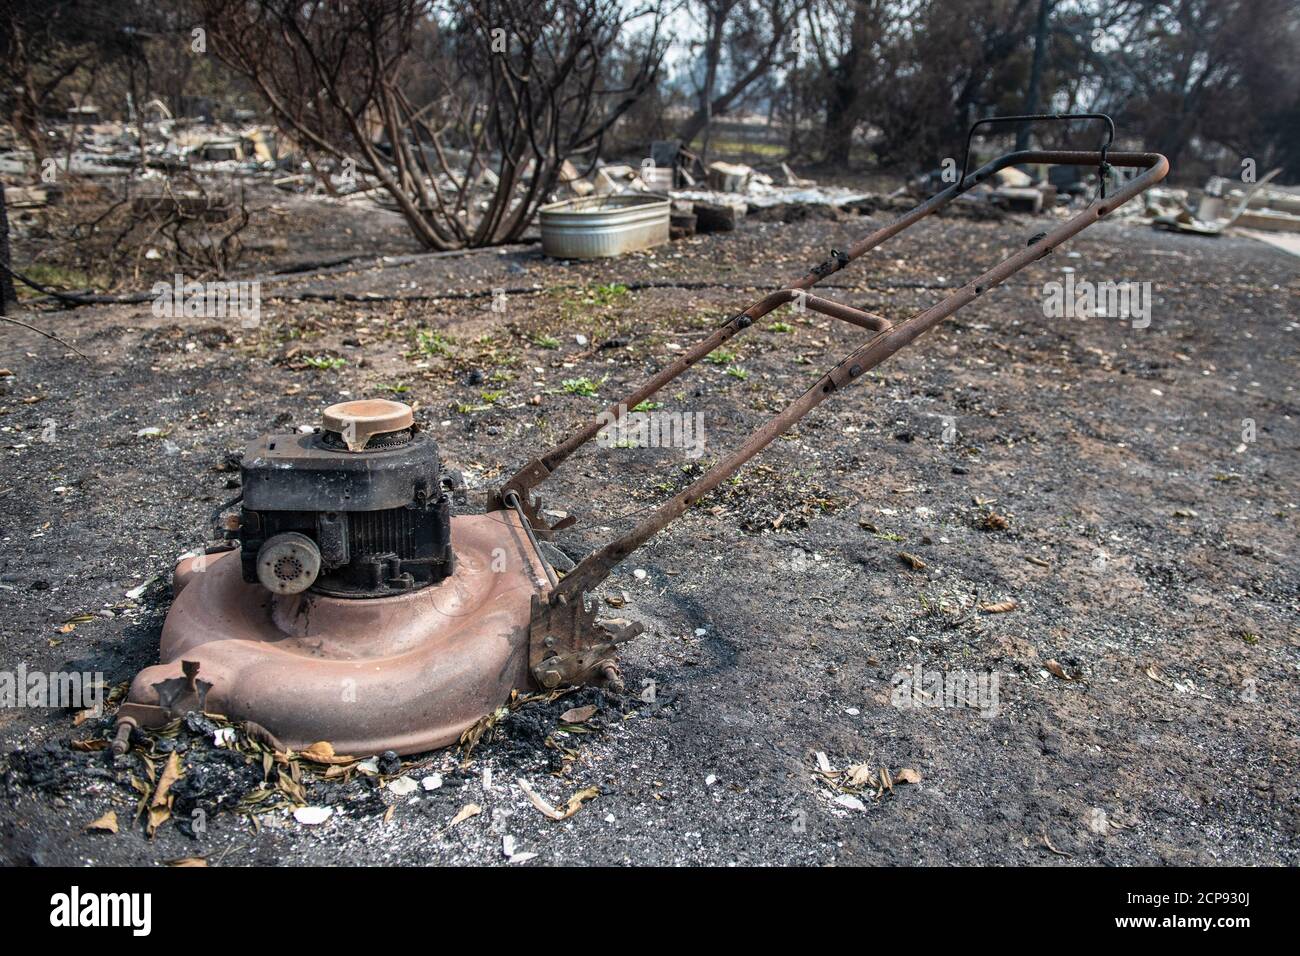 TALENT, ORE - SEPTEMBER 18, 2020: A general view of a burned out lawnmower amid the aftermath of the Almeda Fire. The town of Talent, Oregon, showing the burned out homes, cars and rubble left behind. In Talent, about 20 miles north of the California border, homes were charred beyond recognition. Across the western US, at least 87 wildfires are burning, according to the National Interagency Fire Center. They've torched more than 4.7 million acres -- more than six times the area of Rhode Island. Credit: Chris Tuite/imageSPACE Stock Photo